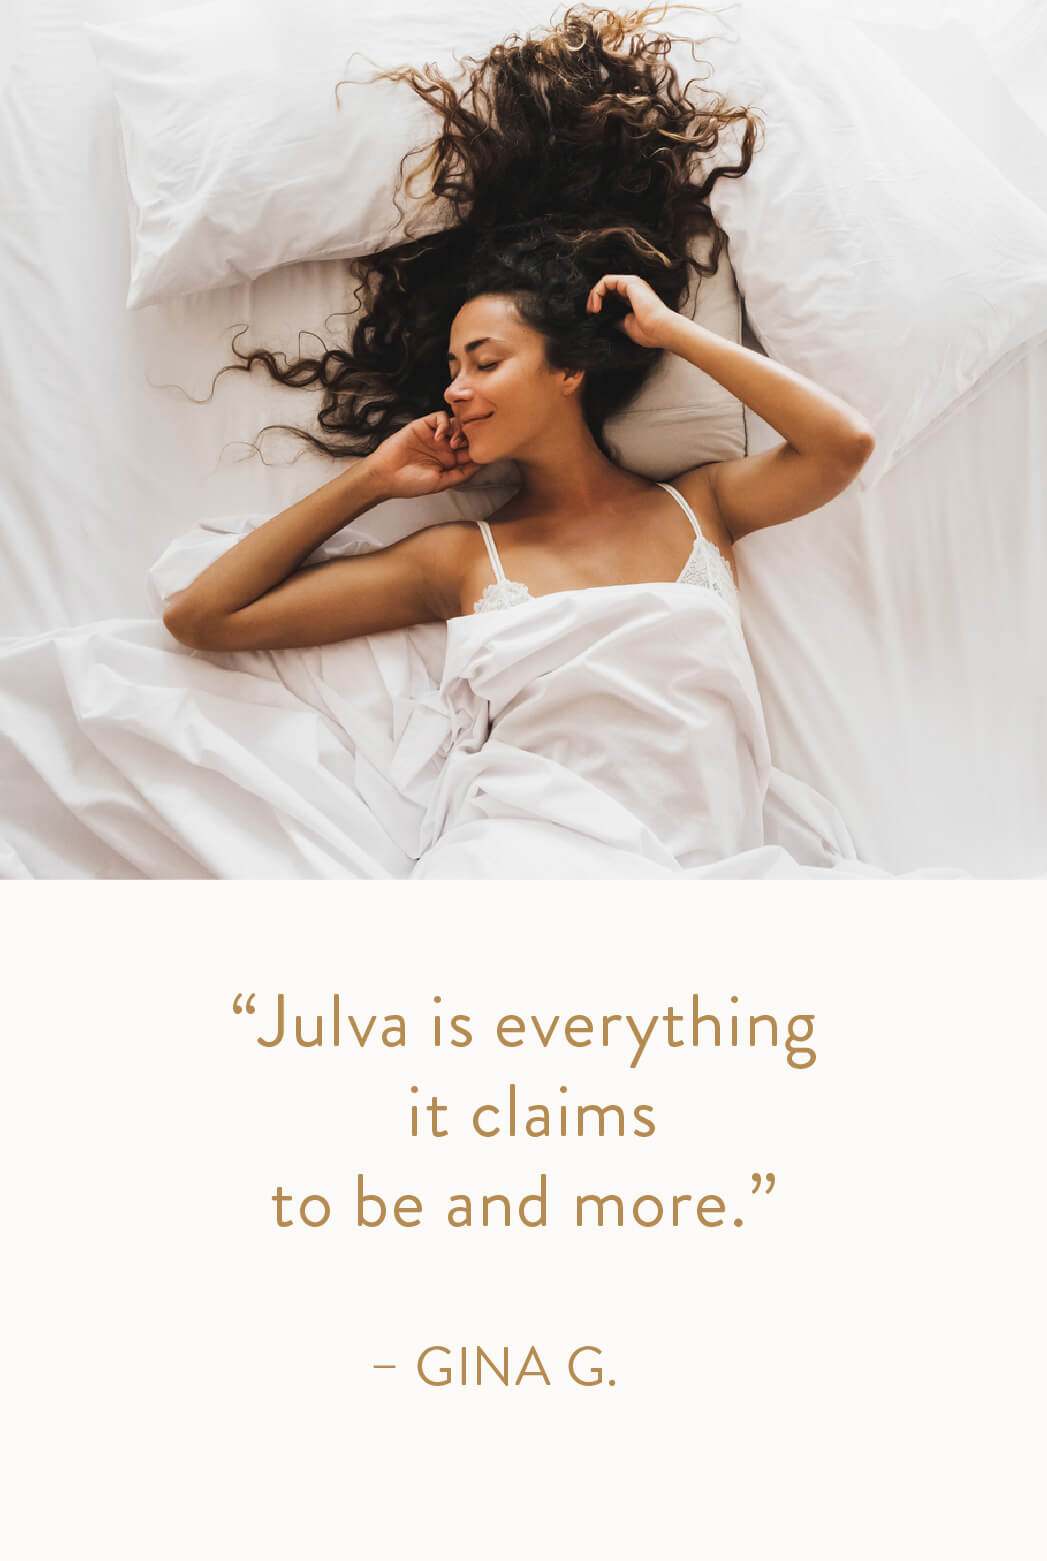 "Julva is everything it claims to be and more." — Gina G.